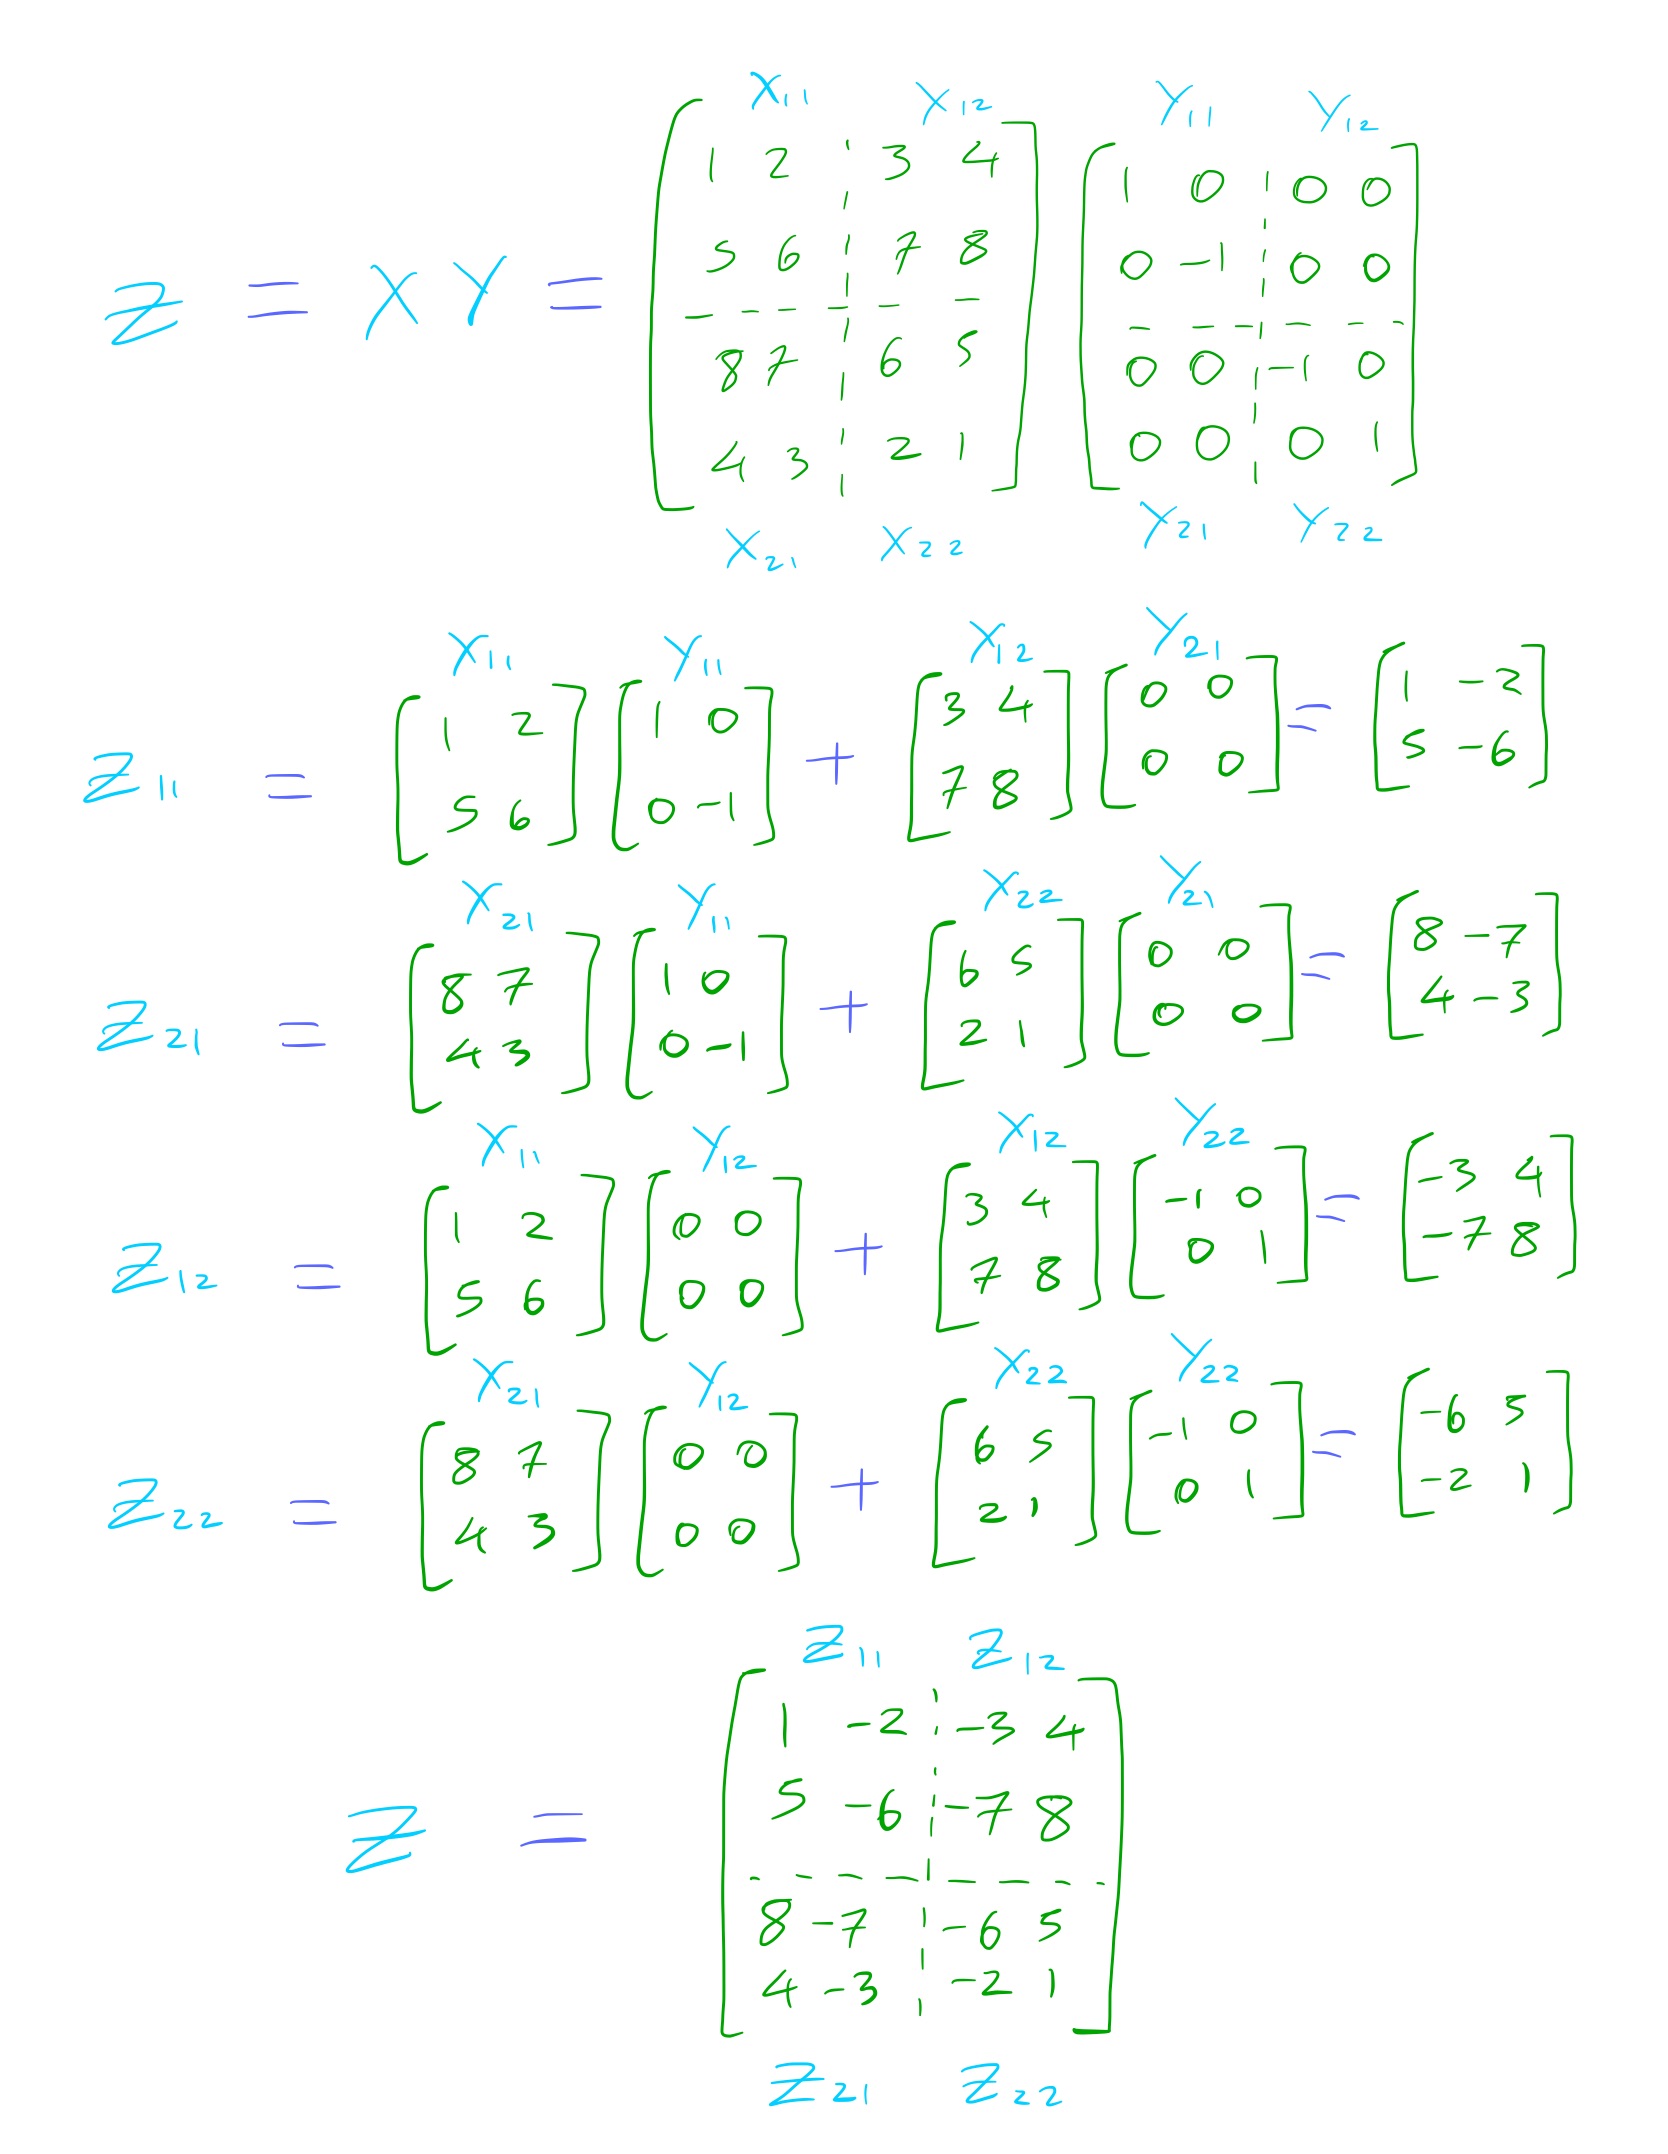 diagram showing blockwise matrix multiplication of 2 4 x 4 matrices divided into 2 x 2 blockwise